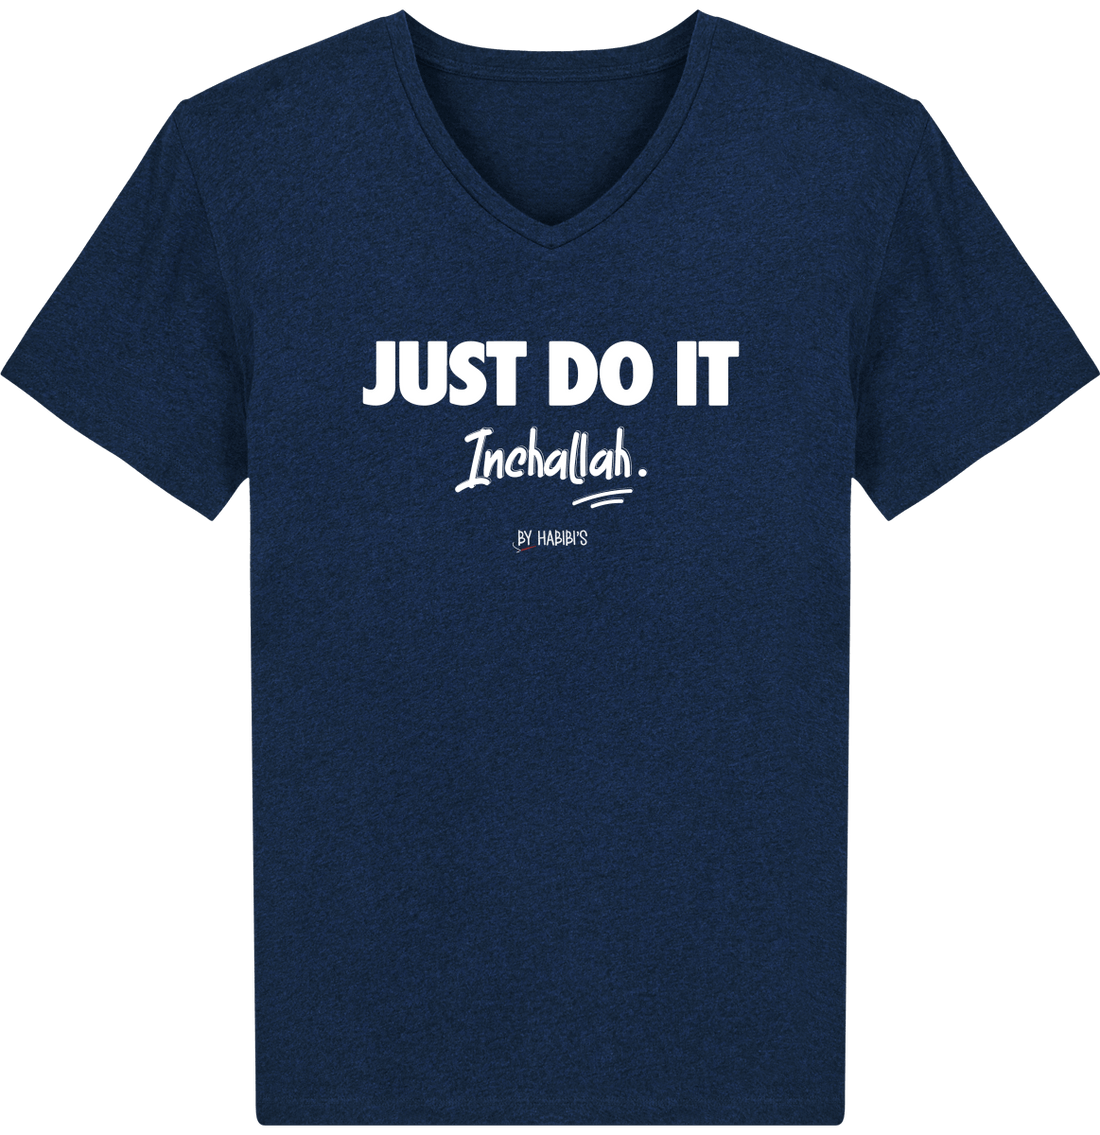 Homme>Tee-shirts - T-Shirt Homme Col V <br> Just Do It Inchallah